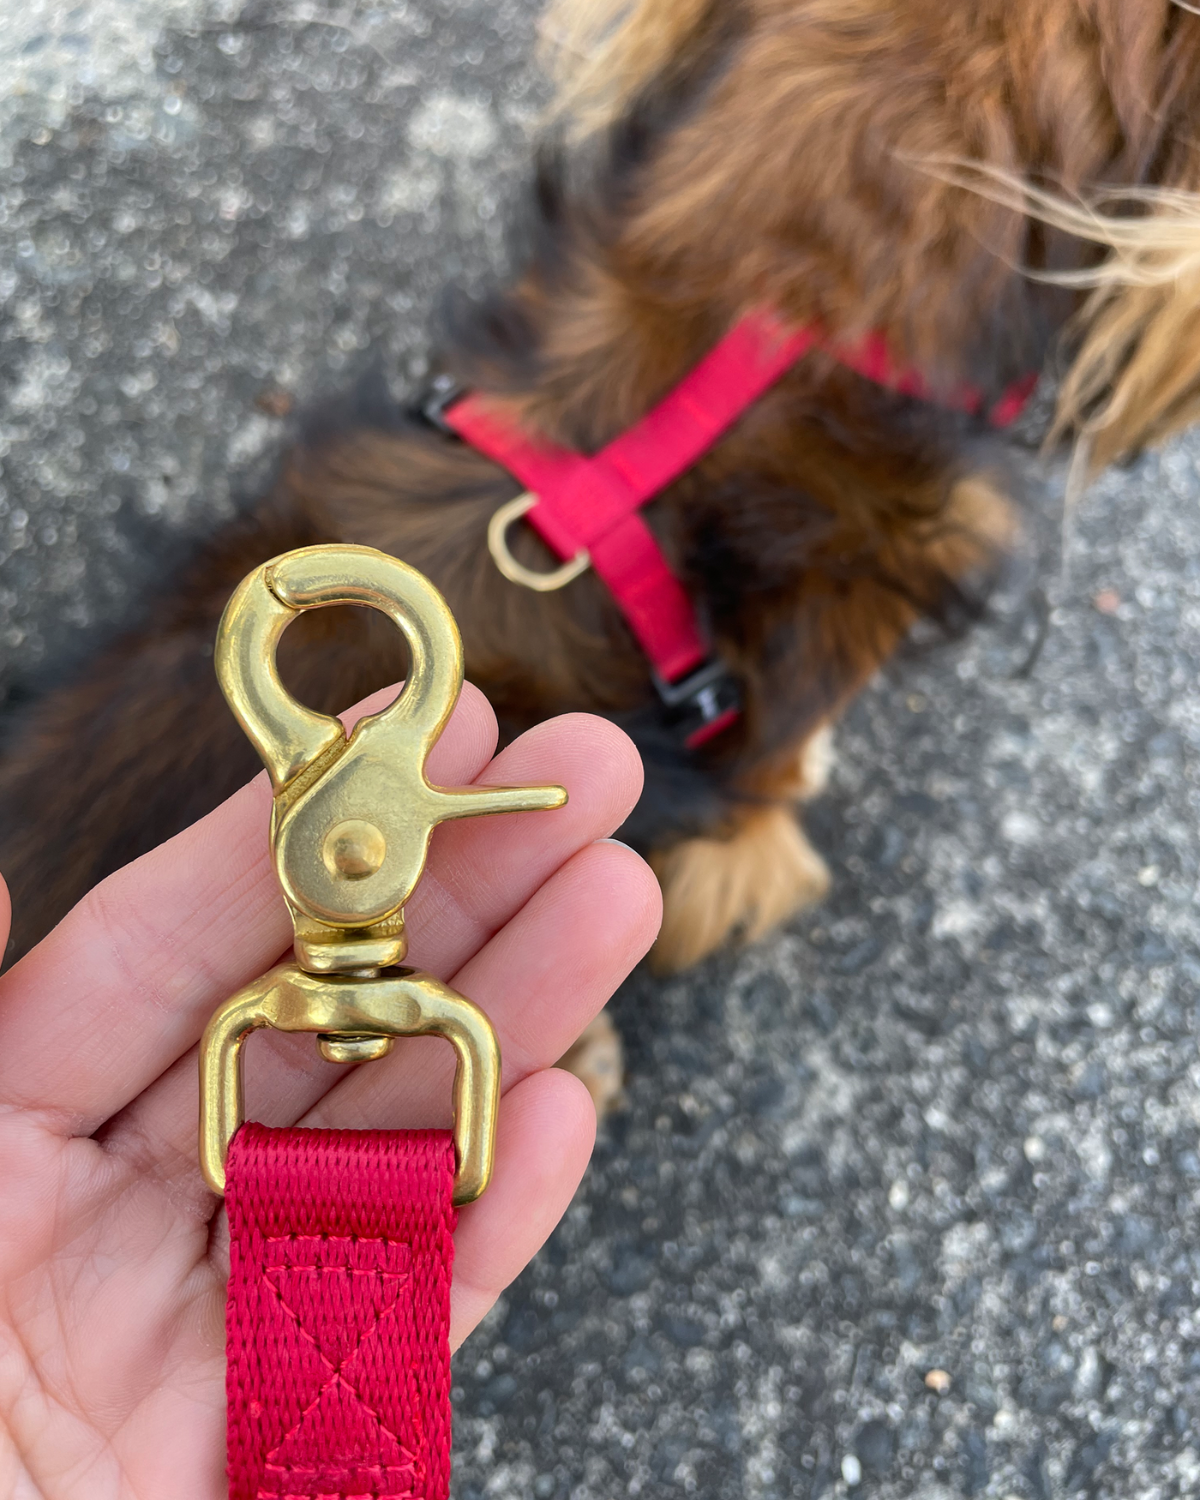 DJANGO's hands-free dog leash features beautiful solid cast hardware that pairs perfectly with your favorite DJANGO Adventure Dog Harness and Collar - djangobrand.com